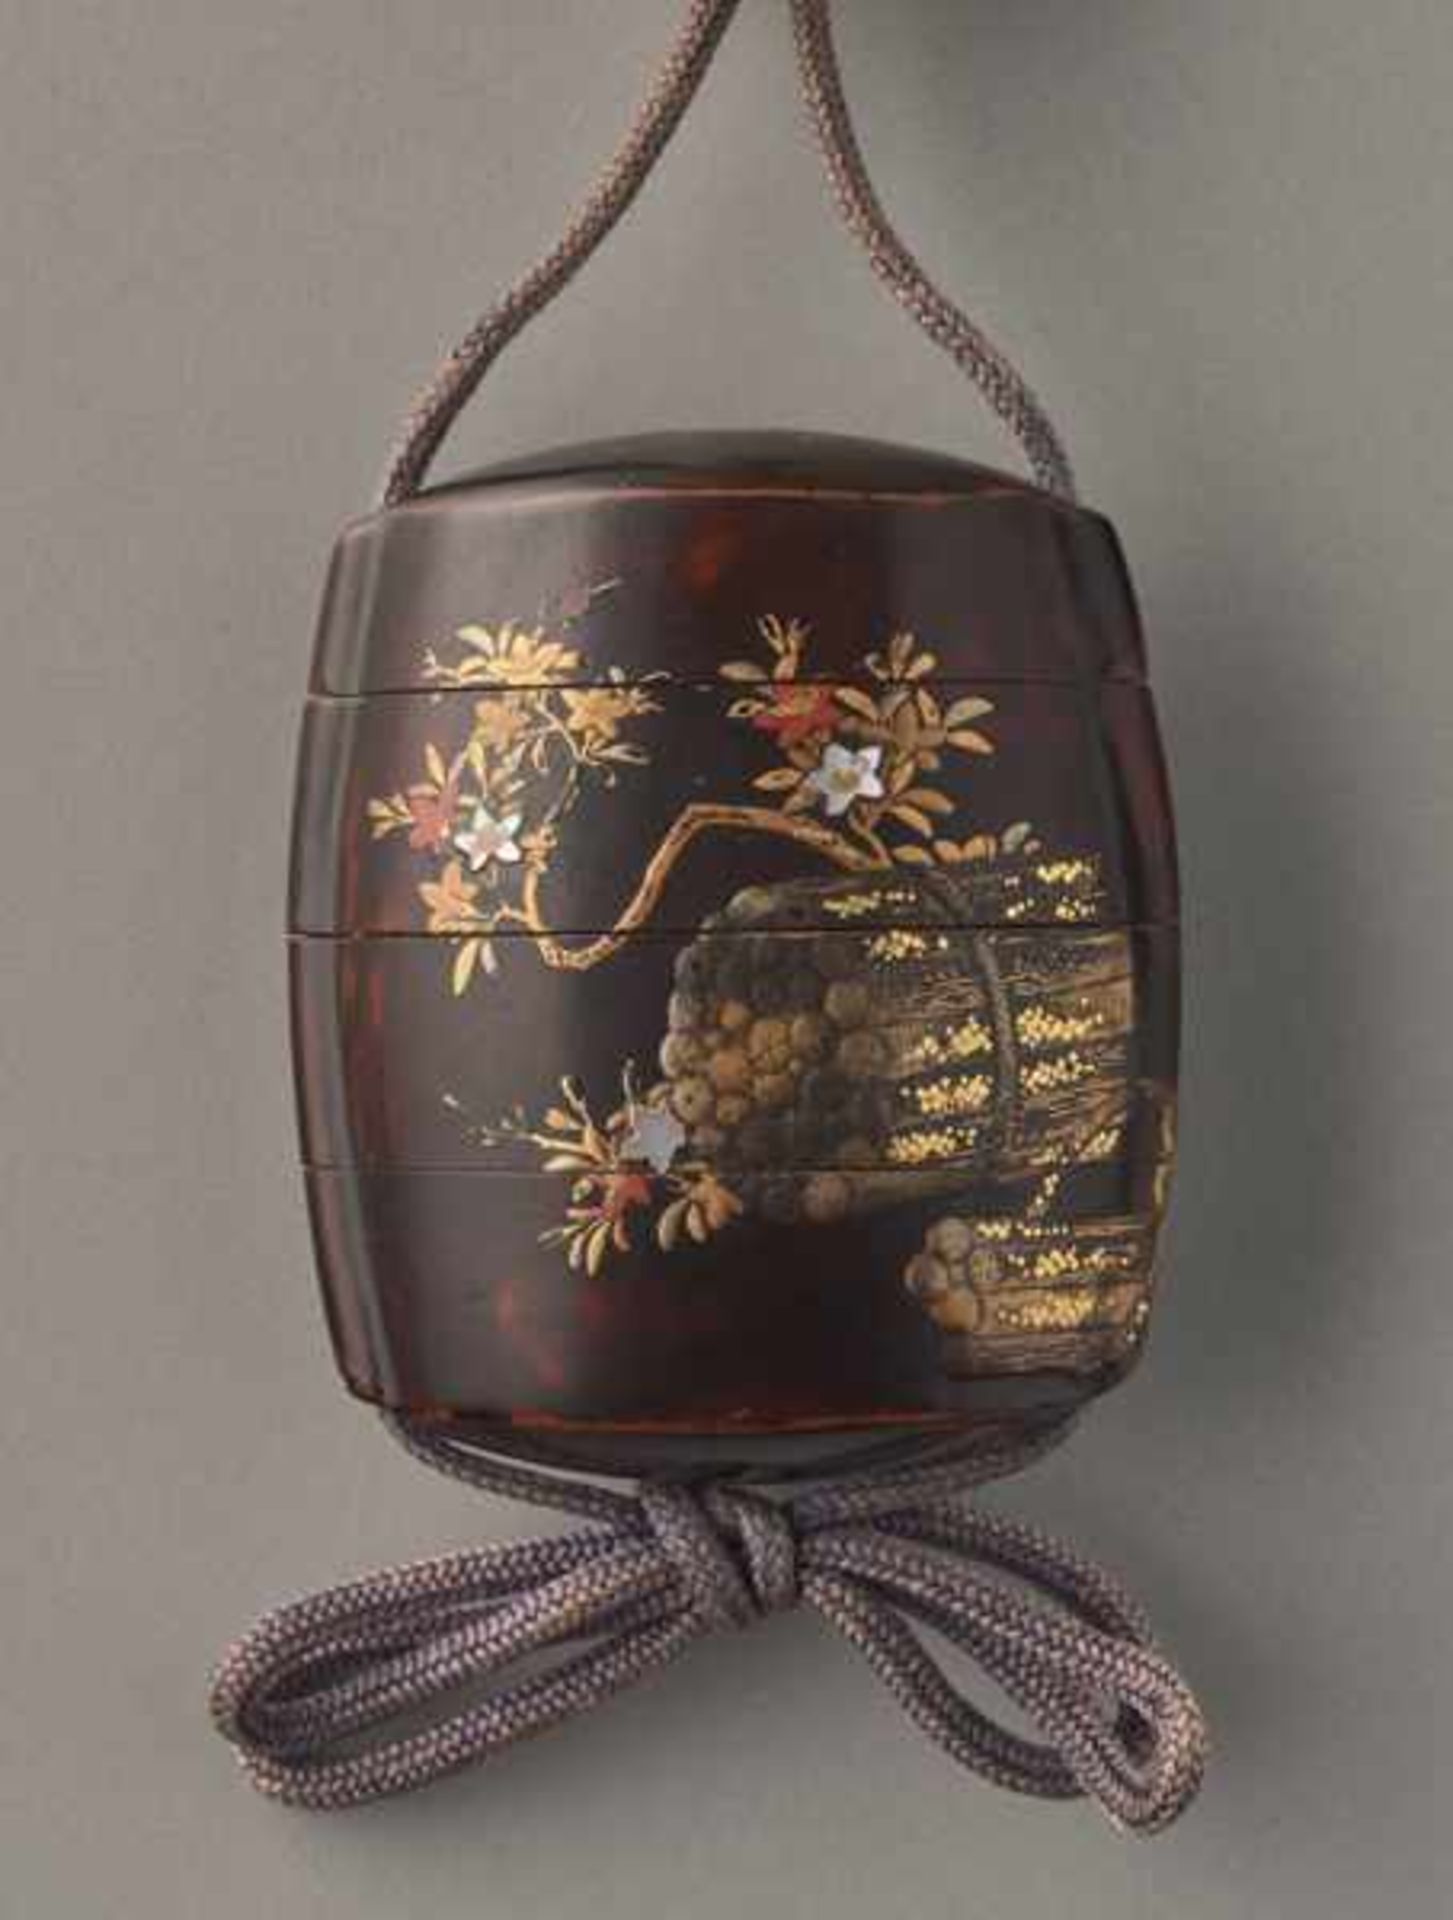 AN UNUSUAL LACQUER AND GOLD INRO OF BLOSSOMS AND SCROLL PA INTINGS Lacquer and gold inro with